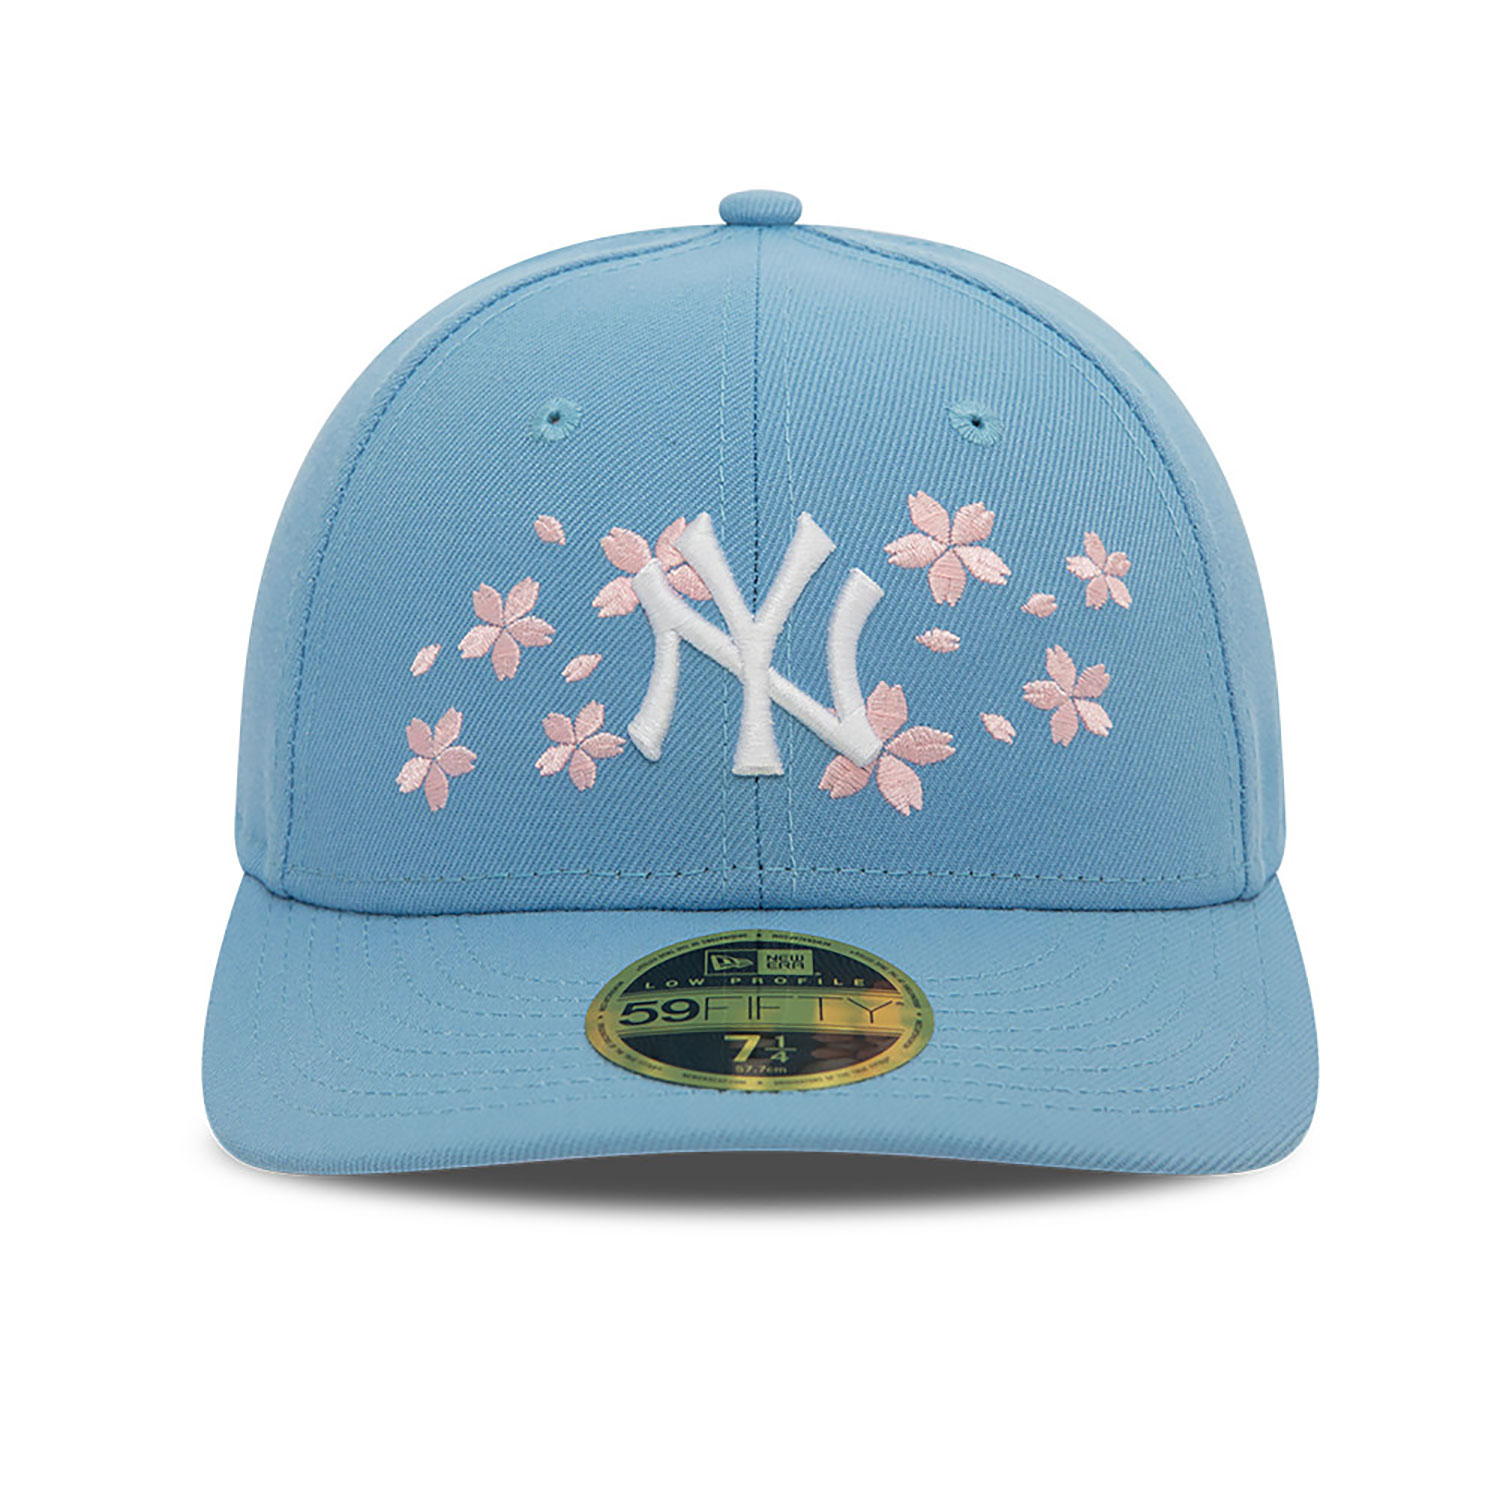 New York Yankees Cherry Blossom Light Blue 59FIFTY Low Profile Cap